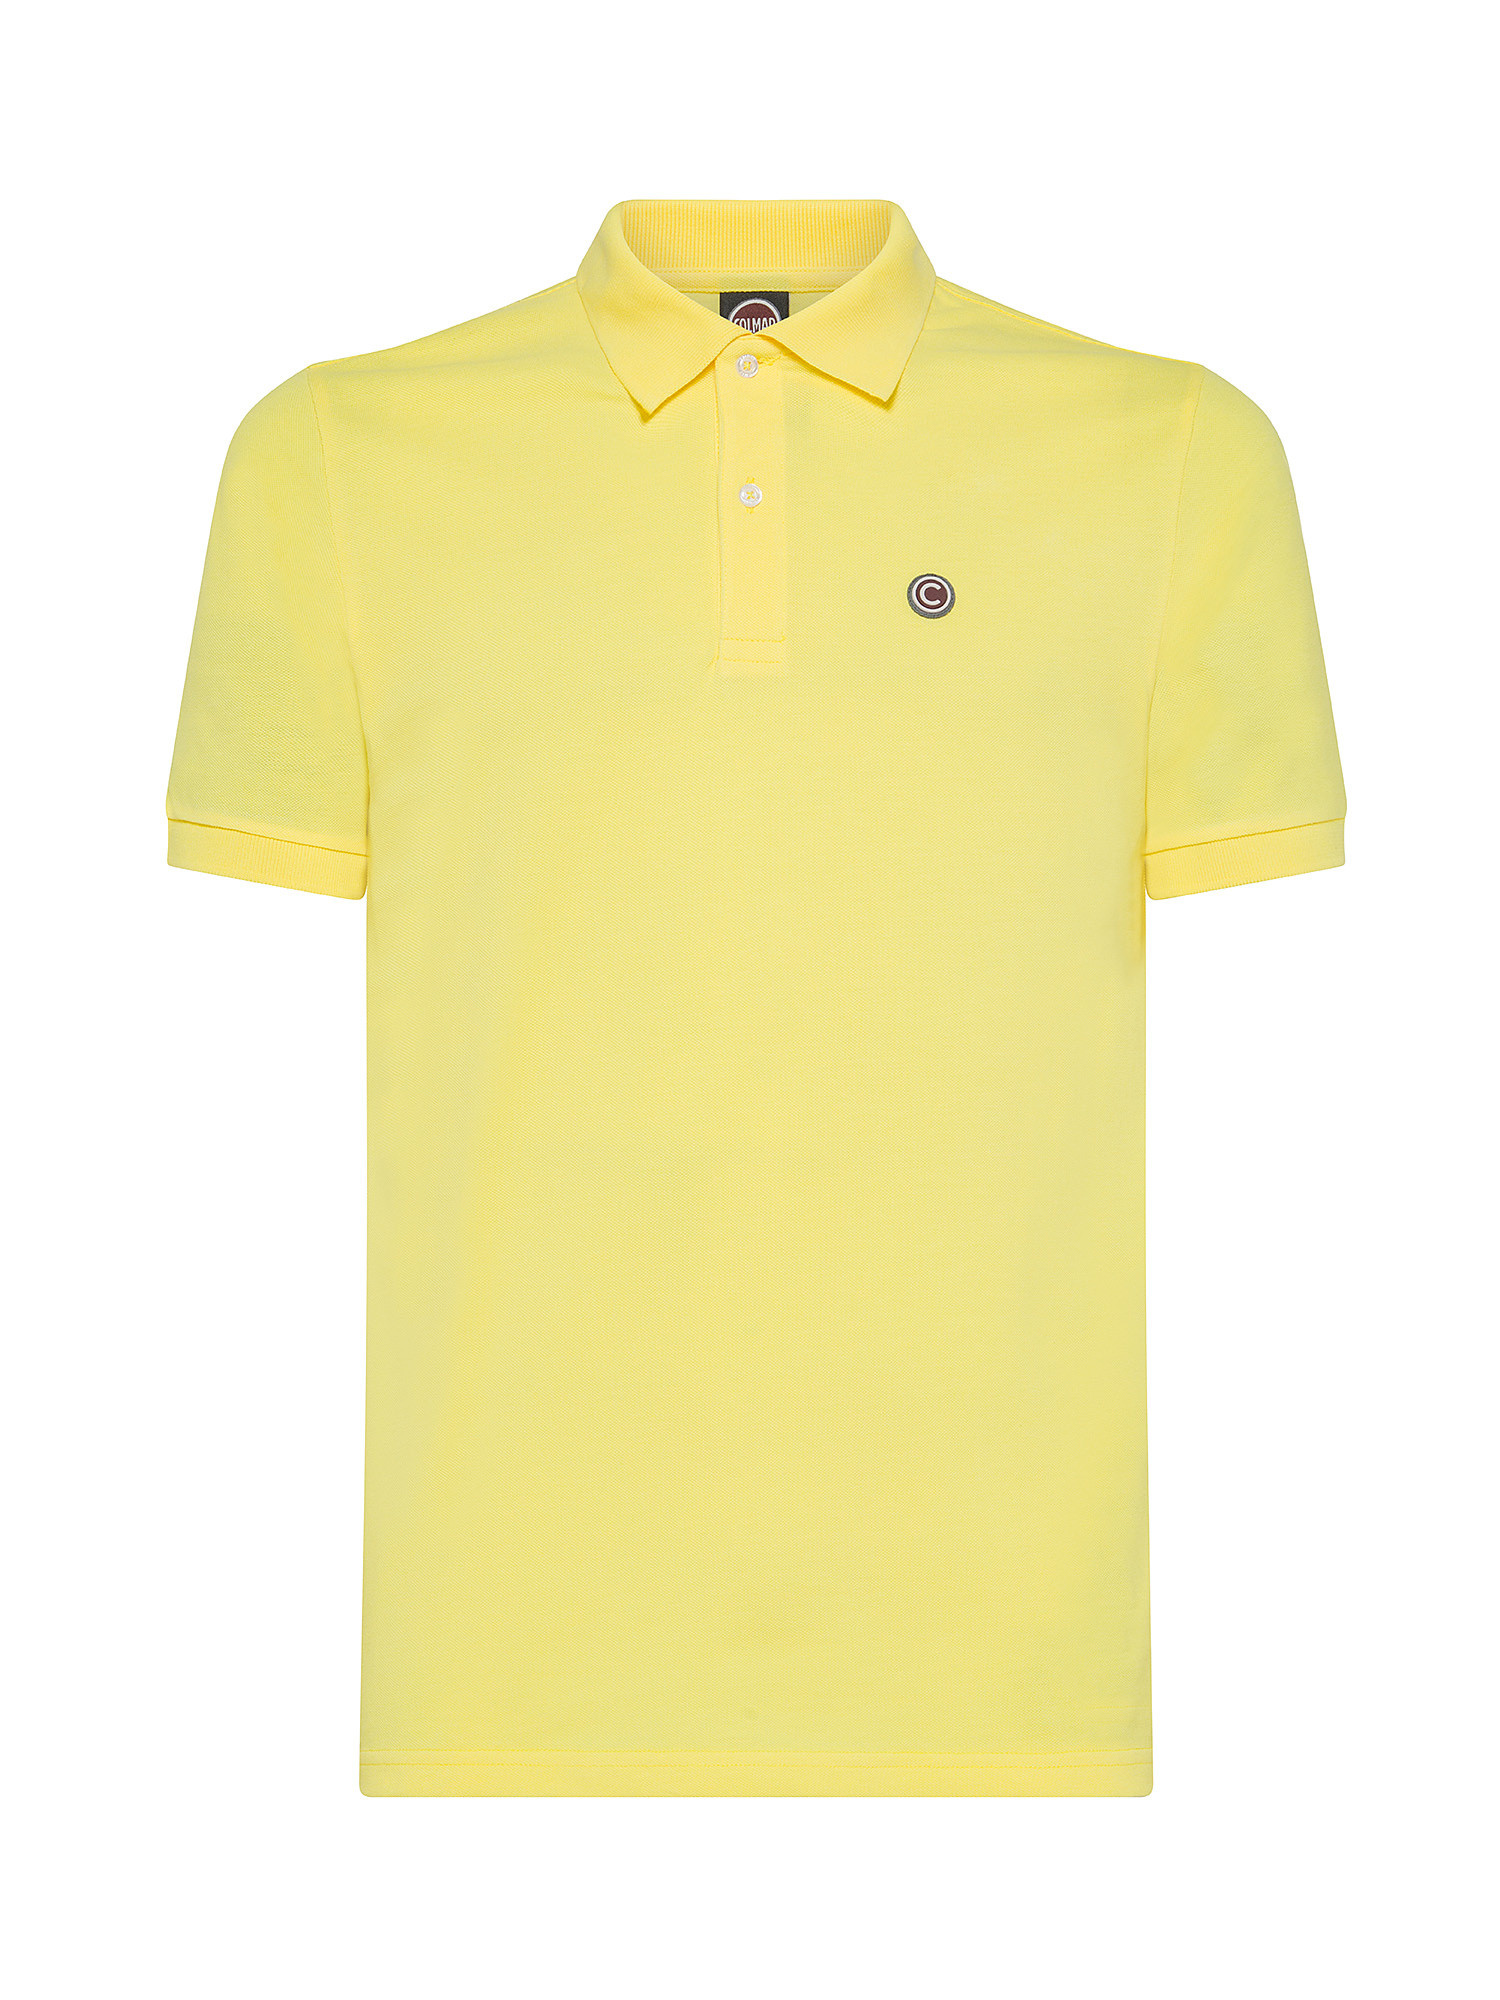 Colmar - Short-sleeved polo shirt in piqué cotton, Yellow, large image number 0